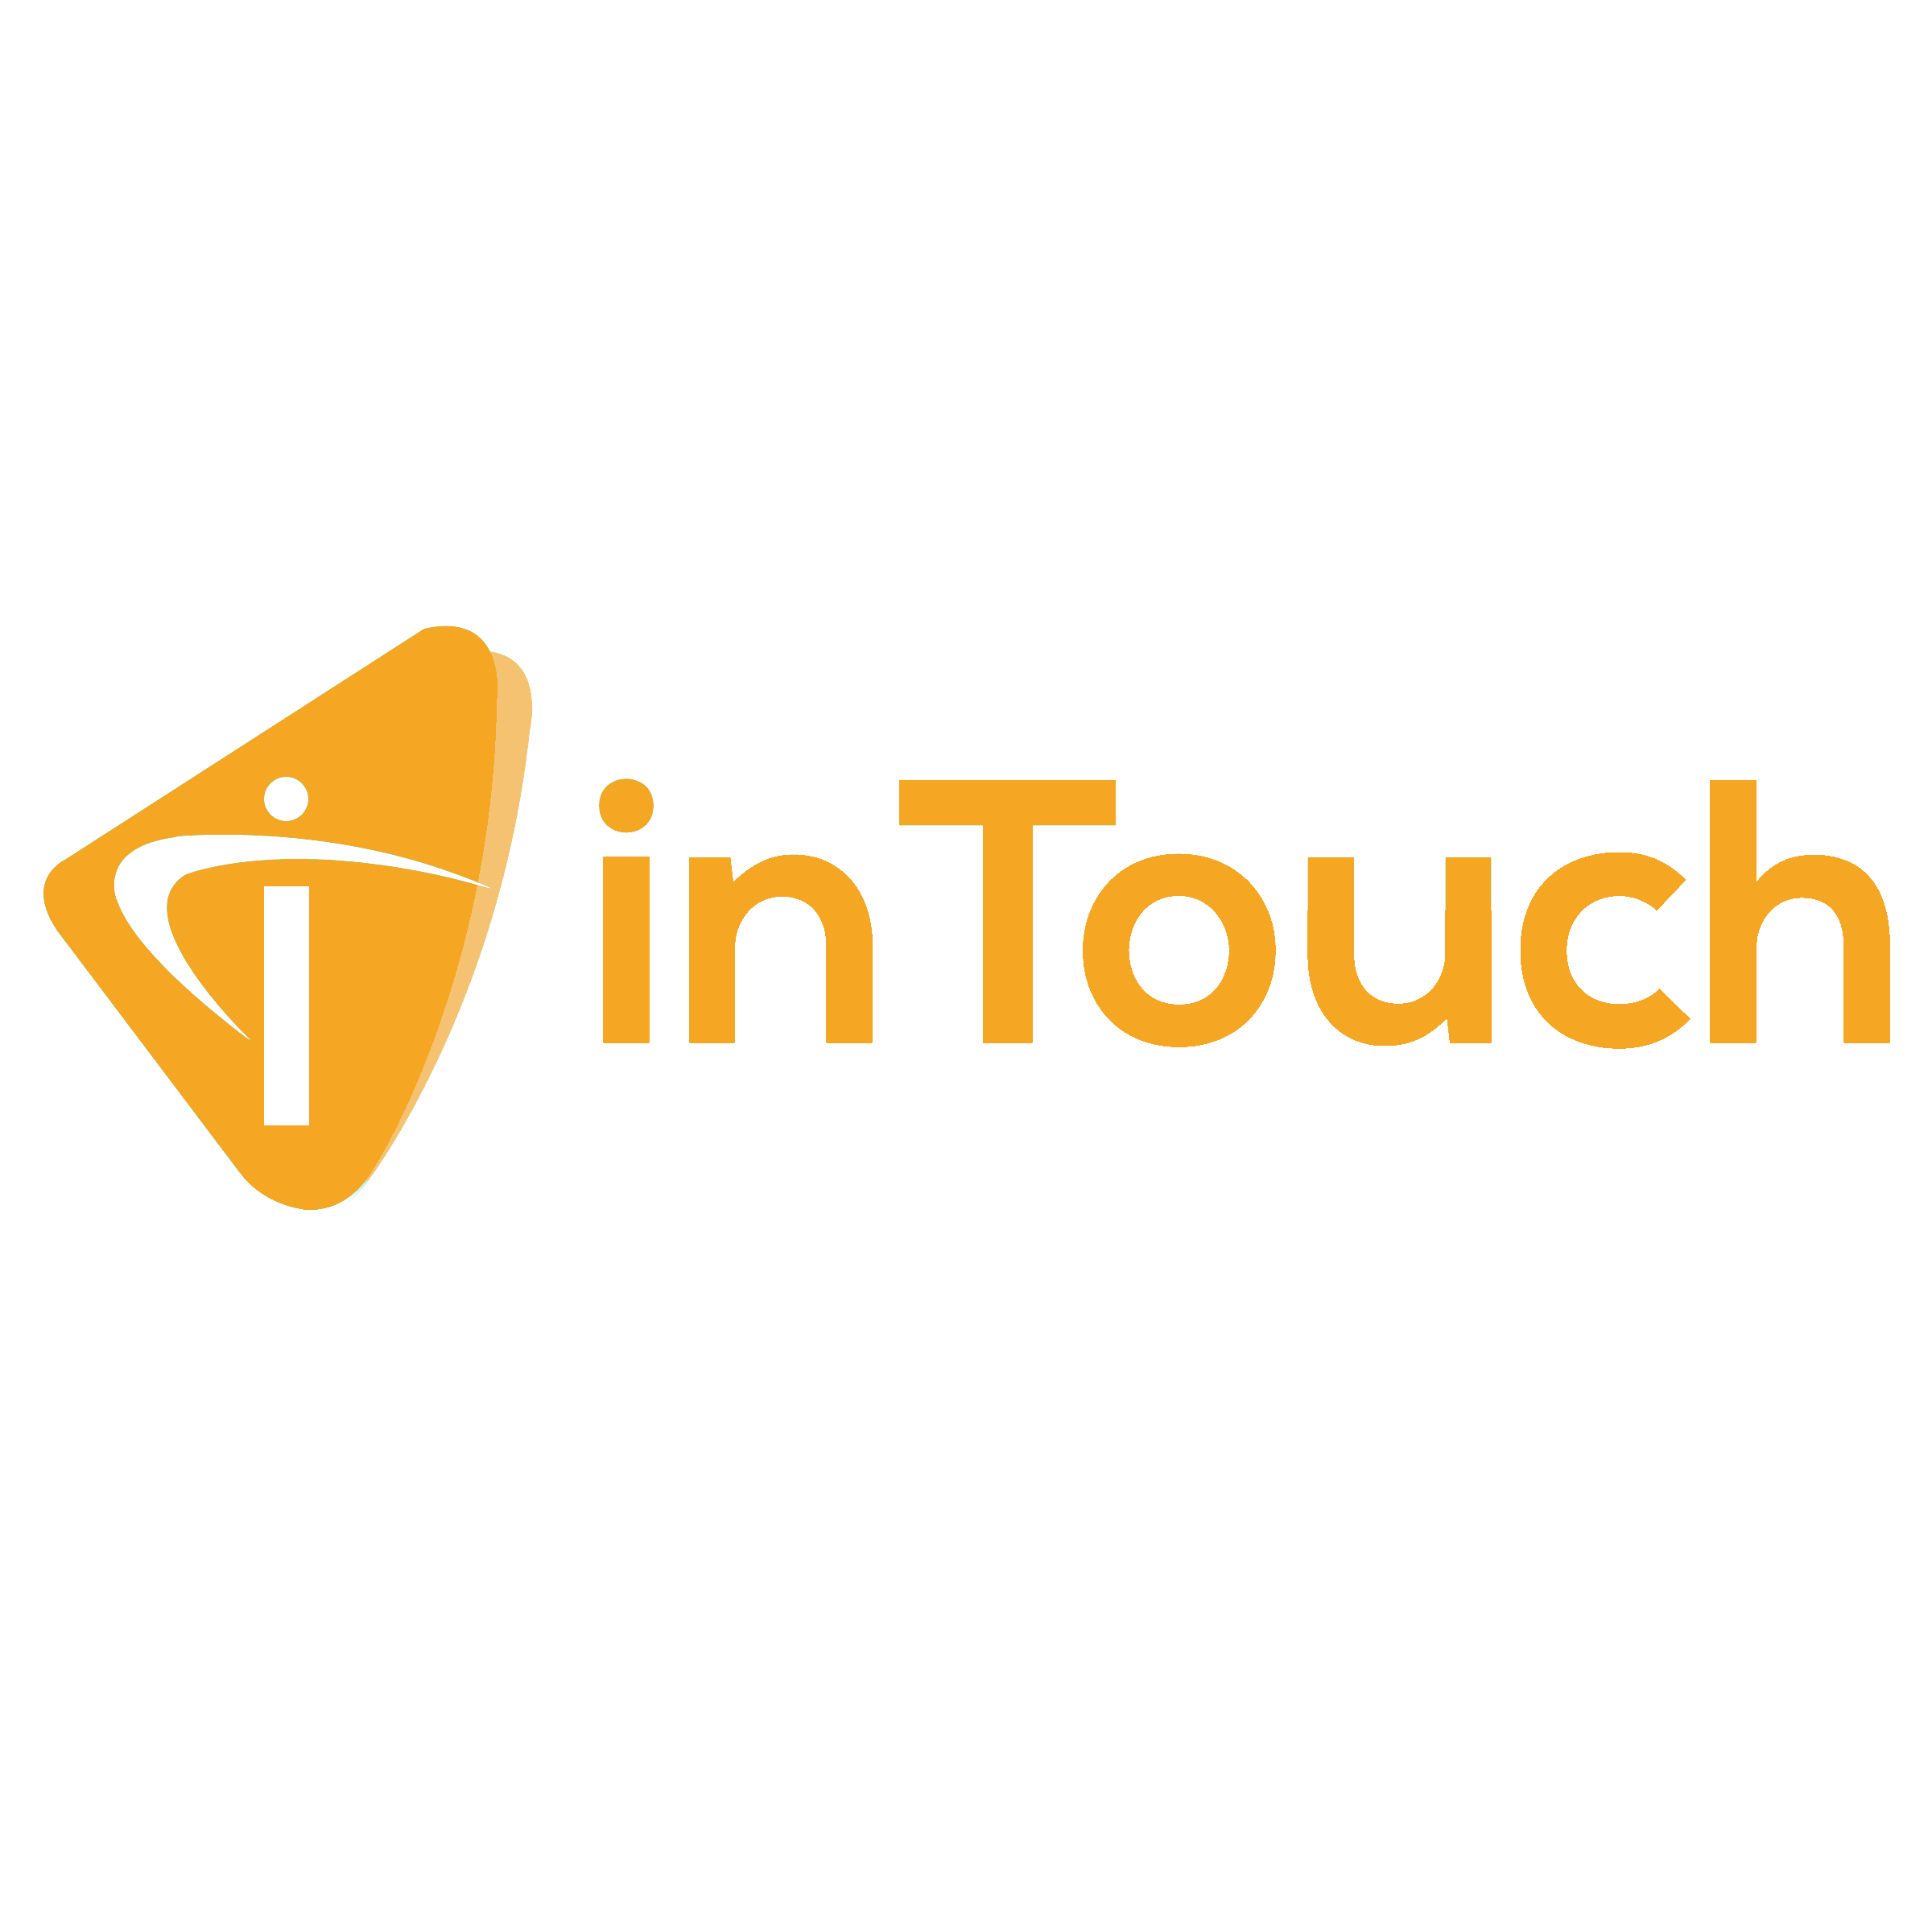 inTouch